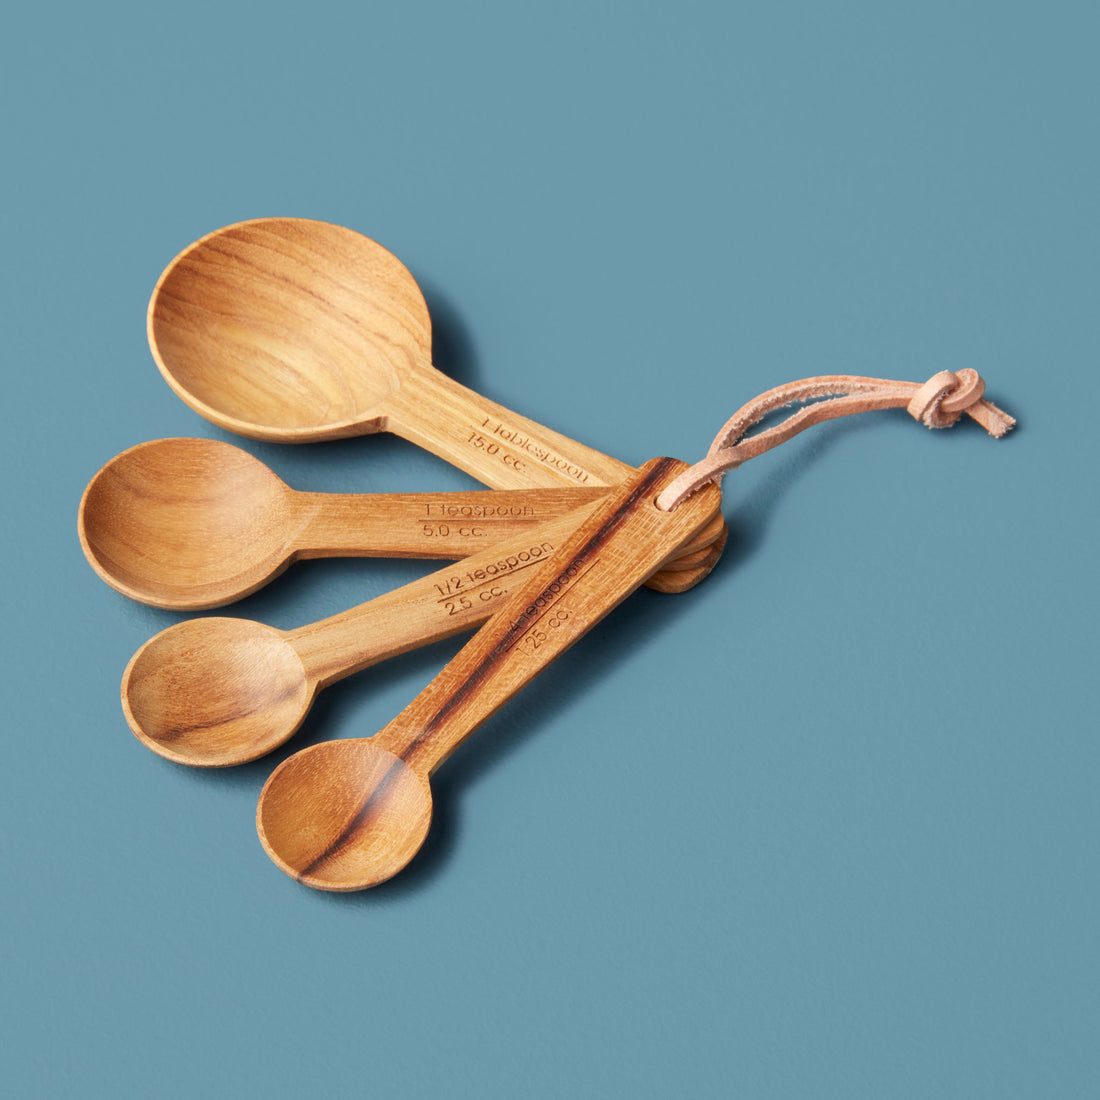 https://cdn.shopify.com/s/files/1/0376/0920/9900/products/Be-Home_Teak-Round-Measuring-Spoons-Set-of-4_39-66.jpg?v=1605656876&width=1100